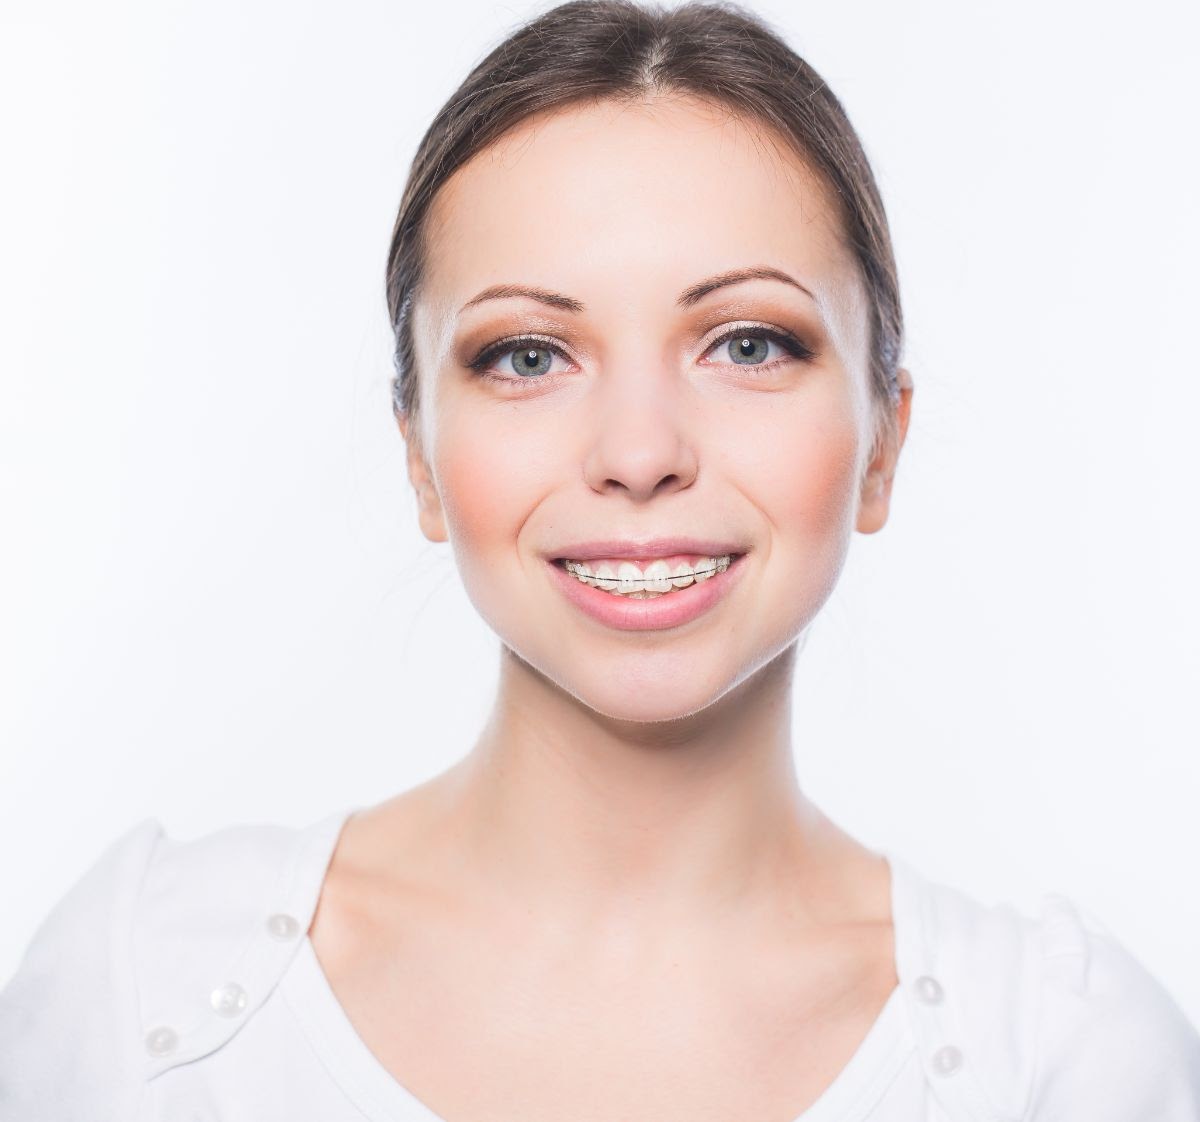 A Guide To Adult Orthodontic Treatment